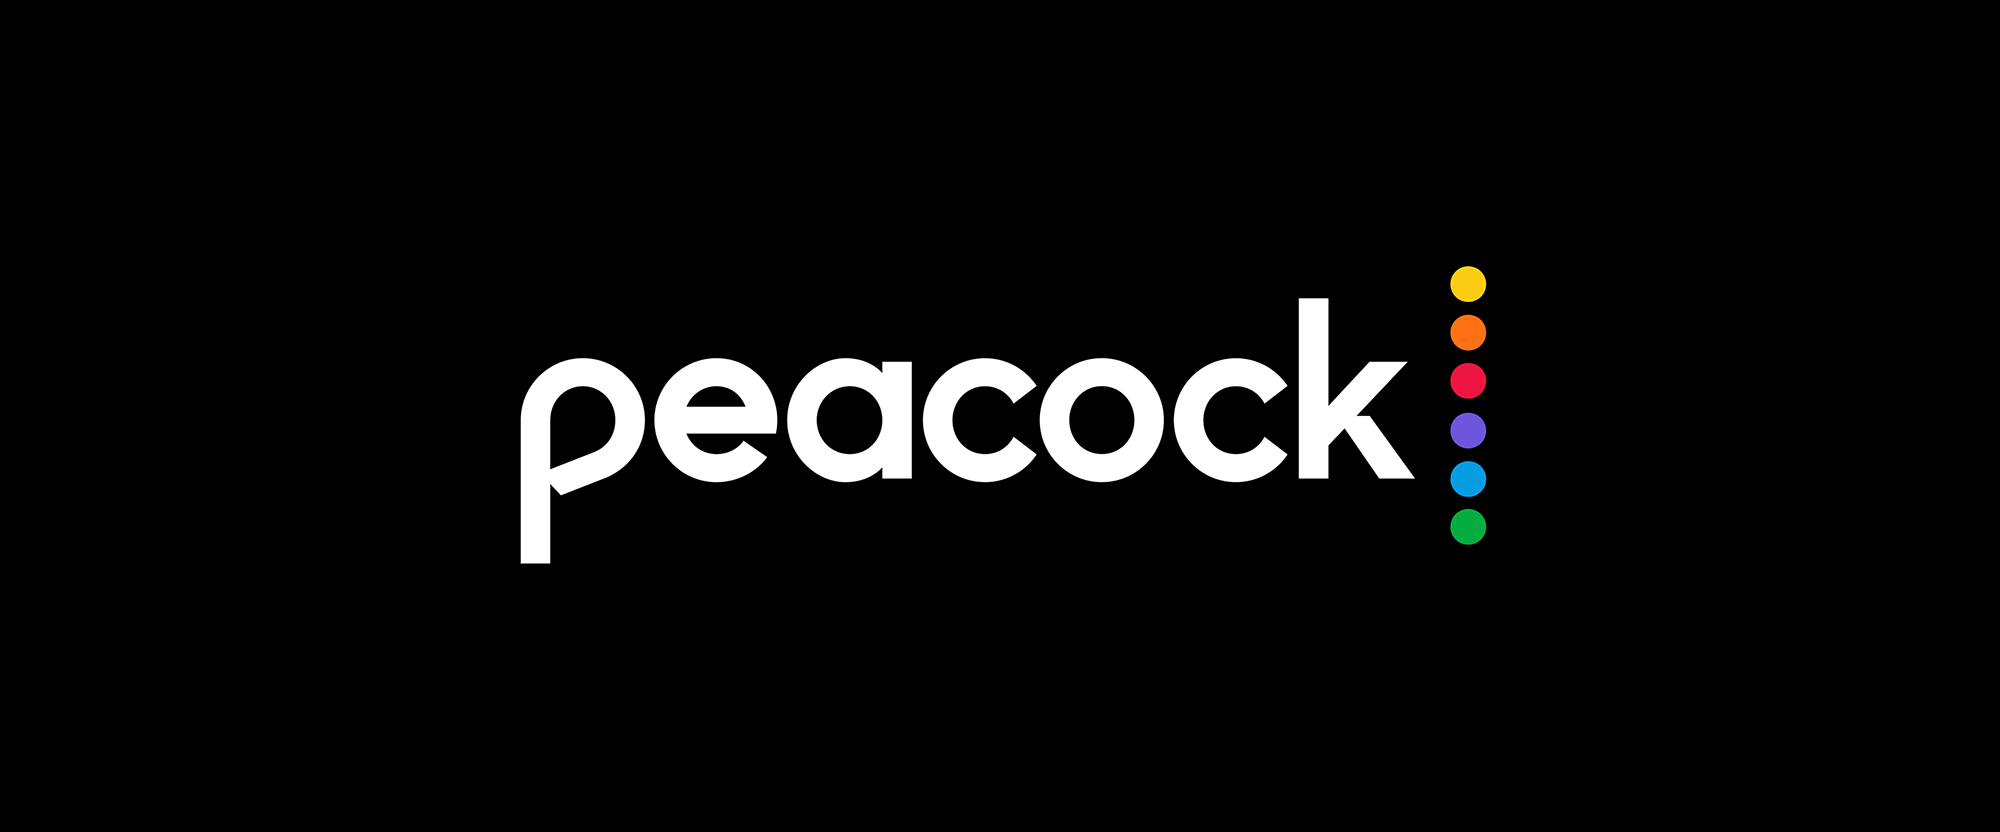 New Name and Logo for Peacock by Loyalkaspar